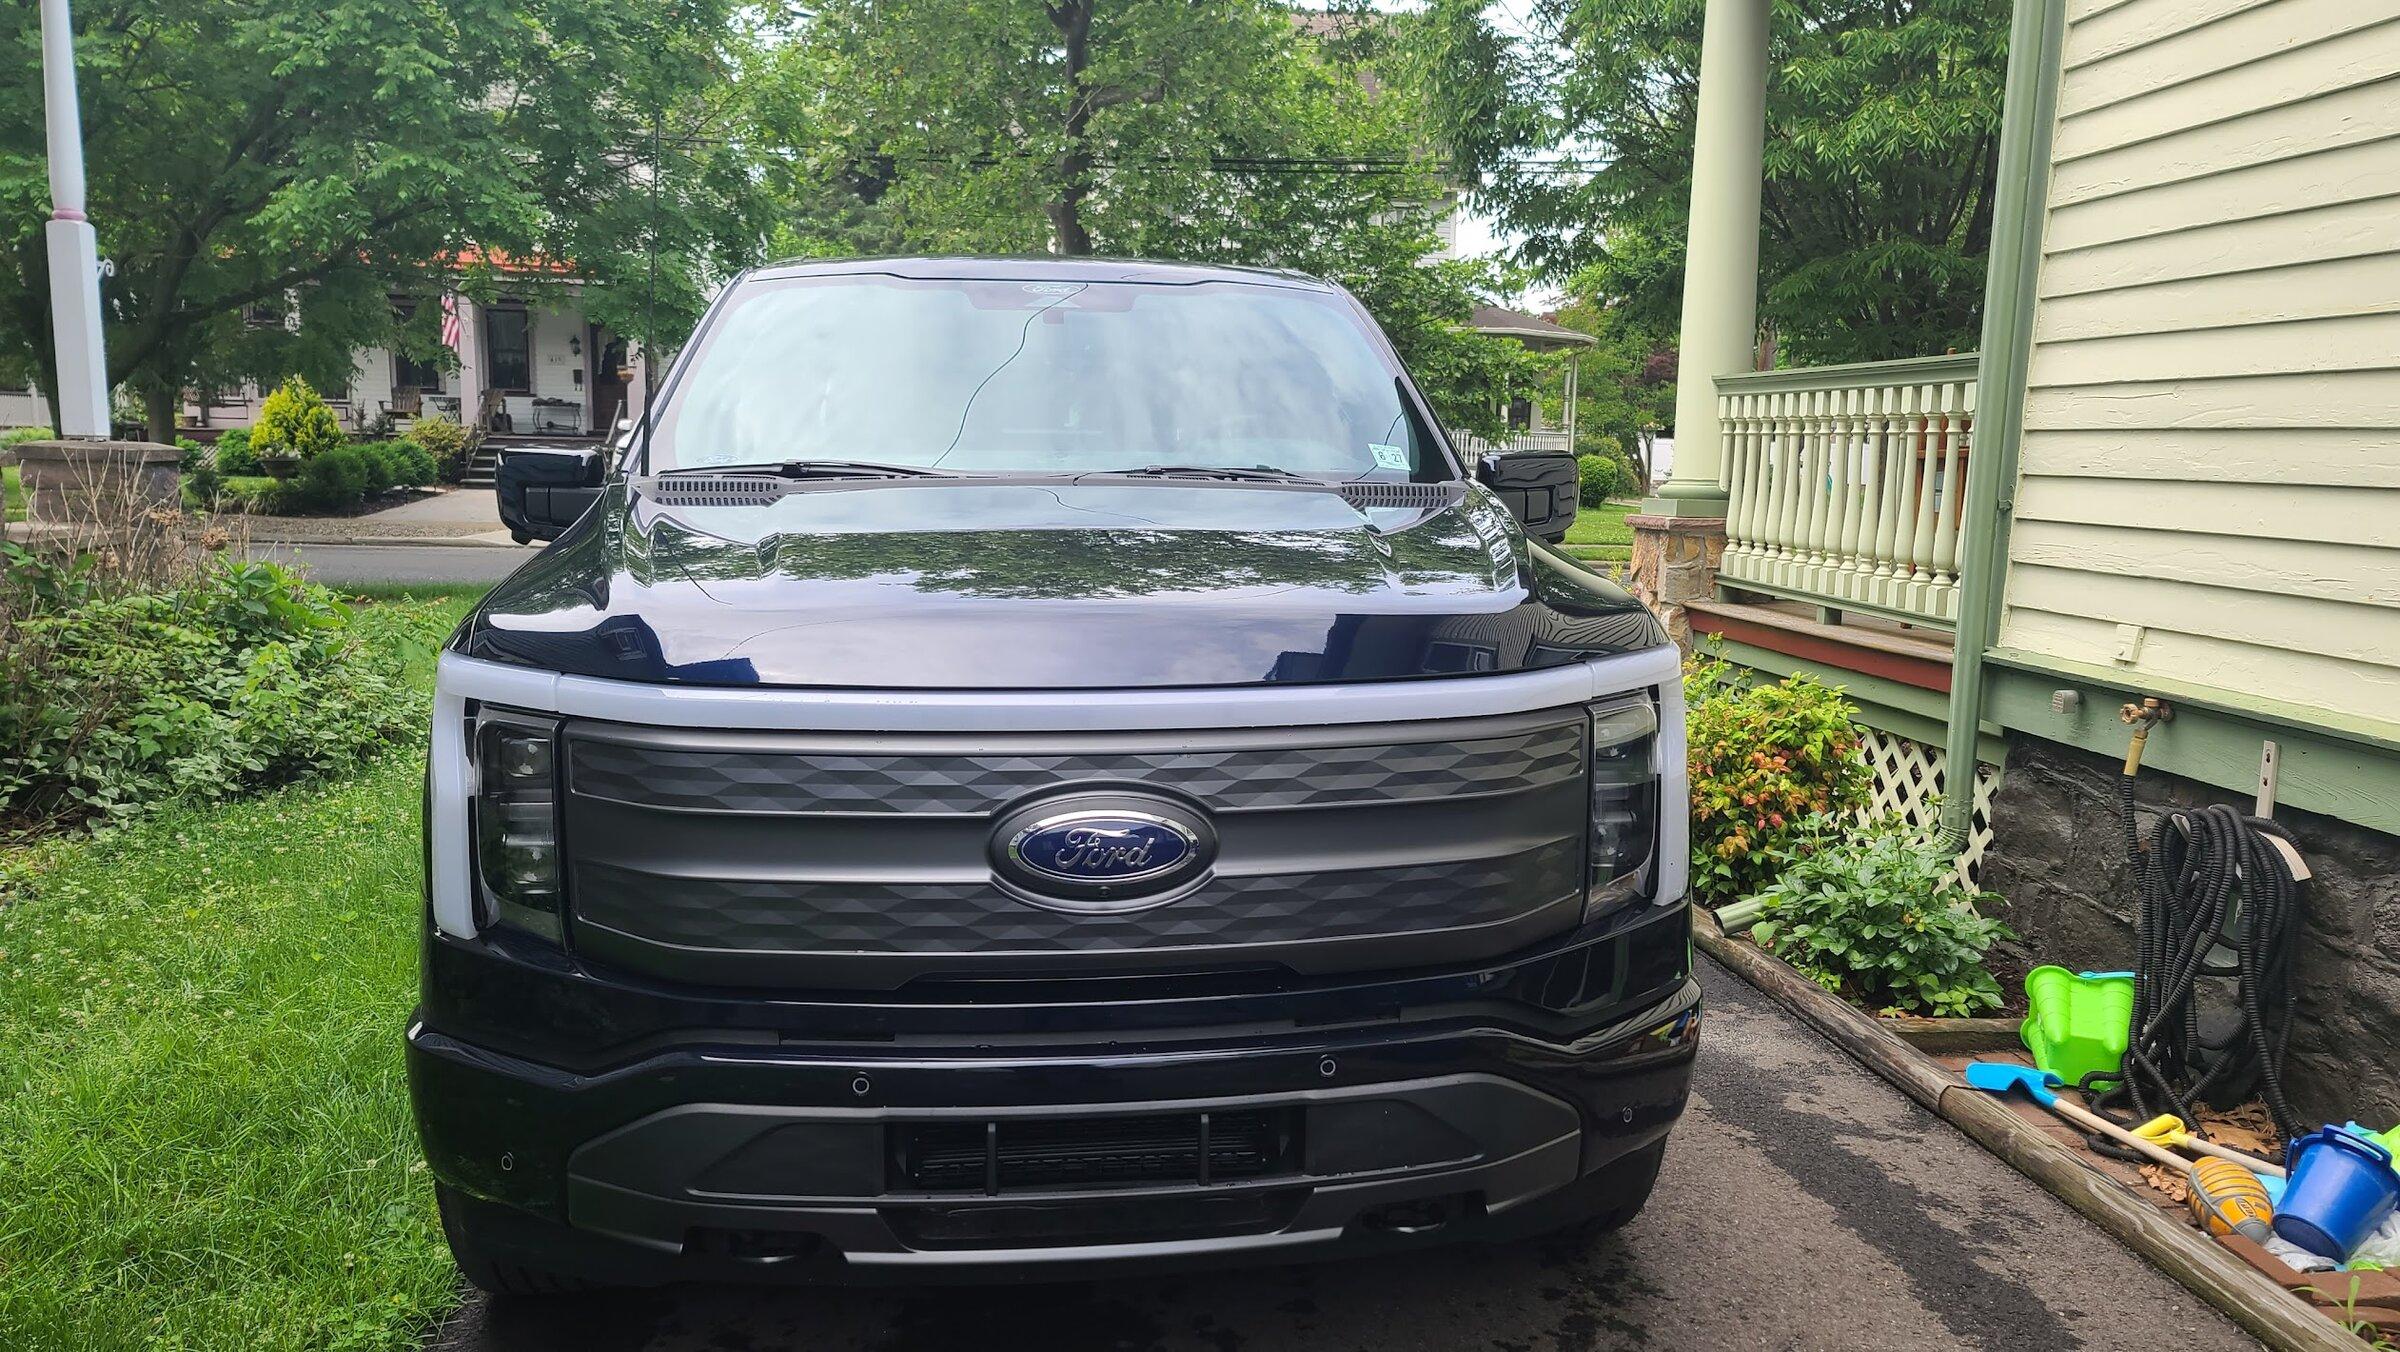 Ford F-150 Lightning Lightning Delivered (maybe first in NJ) - Updated With AMB Photos Galore 20220603_112534